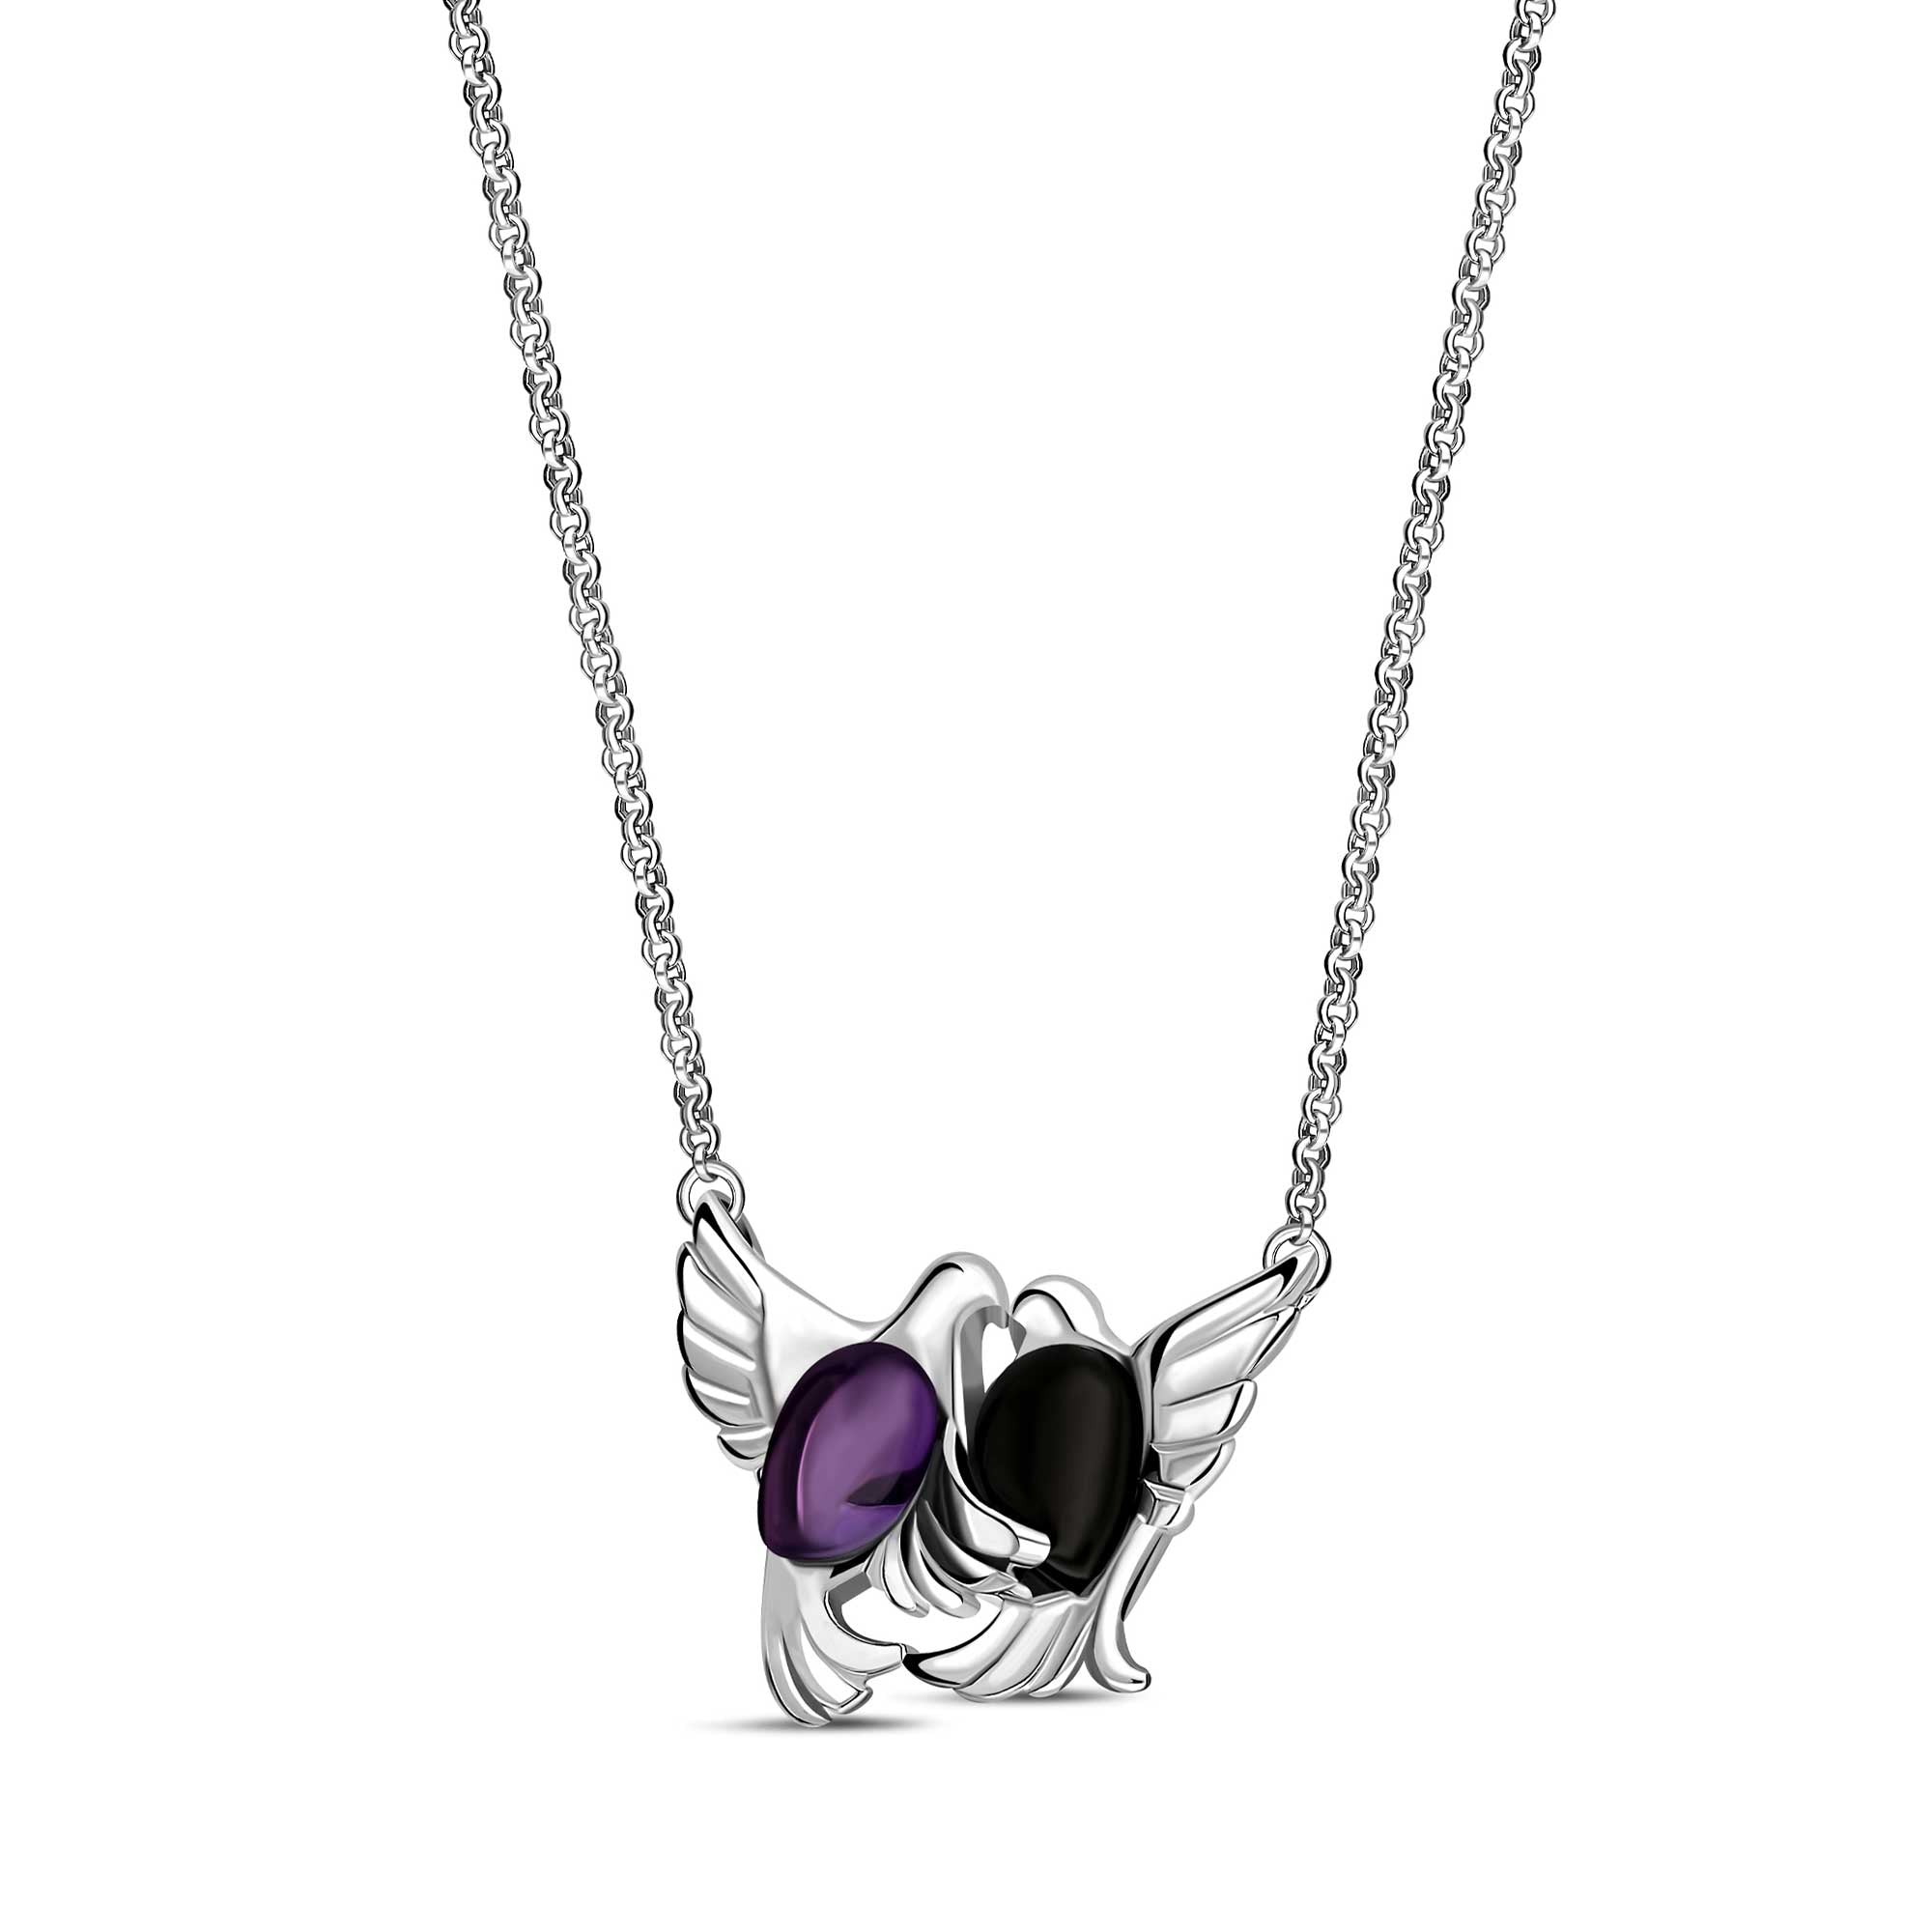 Sterling Silver Whitby Jet & Amethyst Entwined Dove Necklace